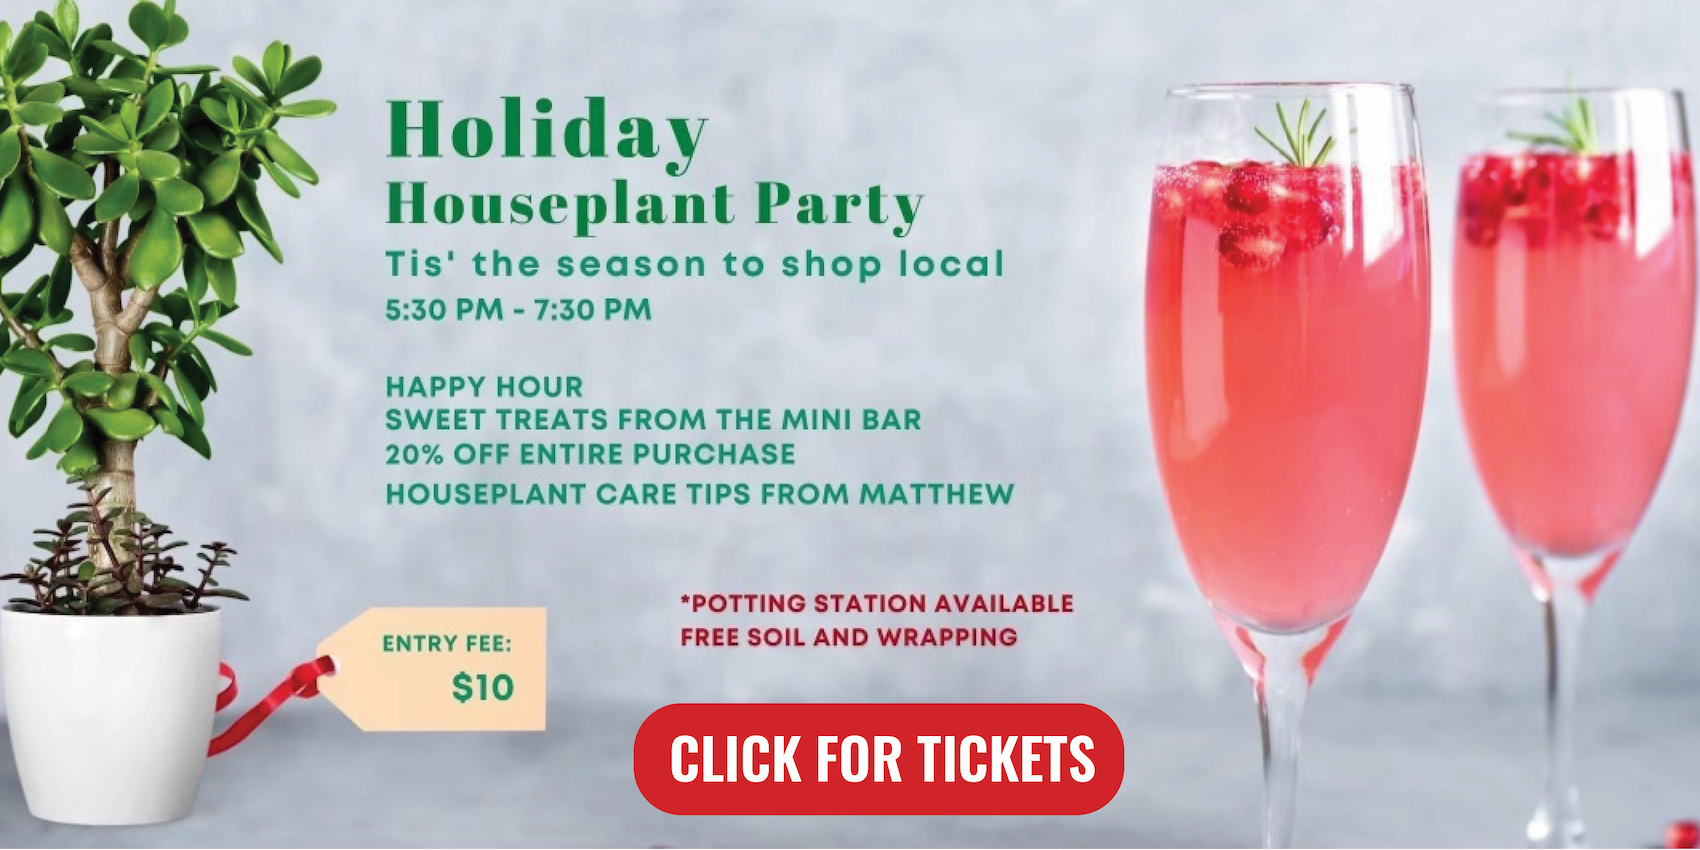 Holiday Houseplant Party Tickets